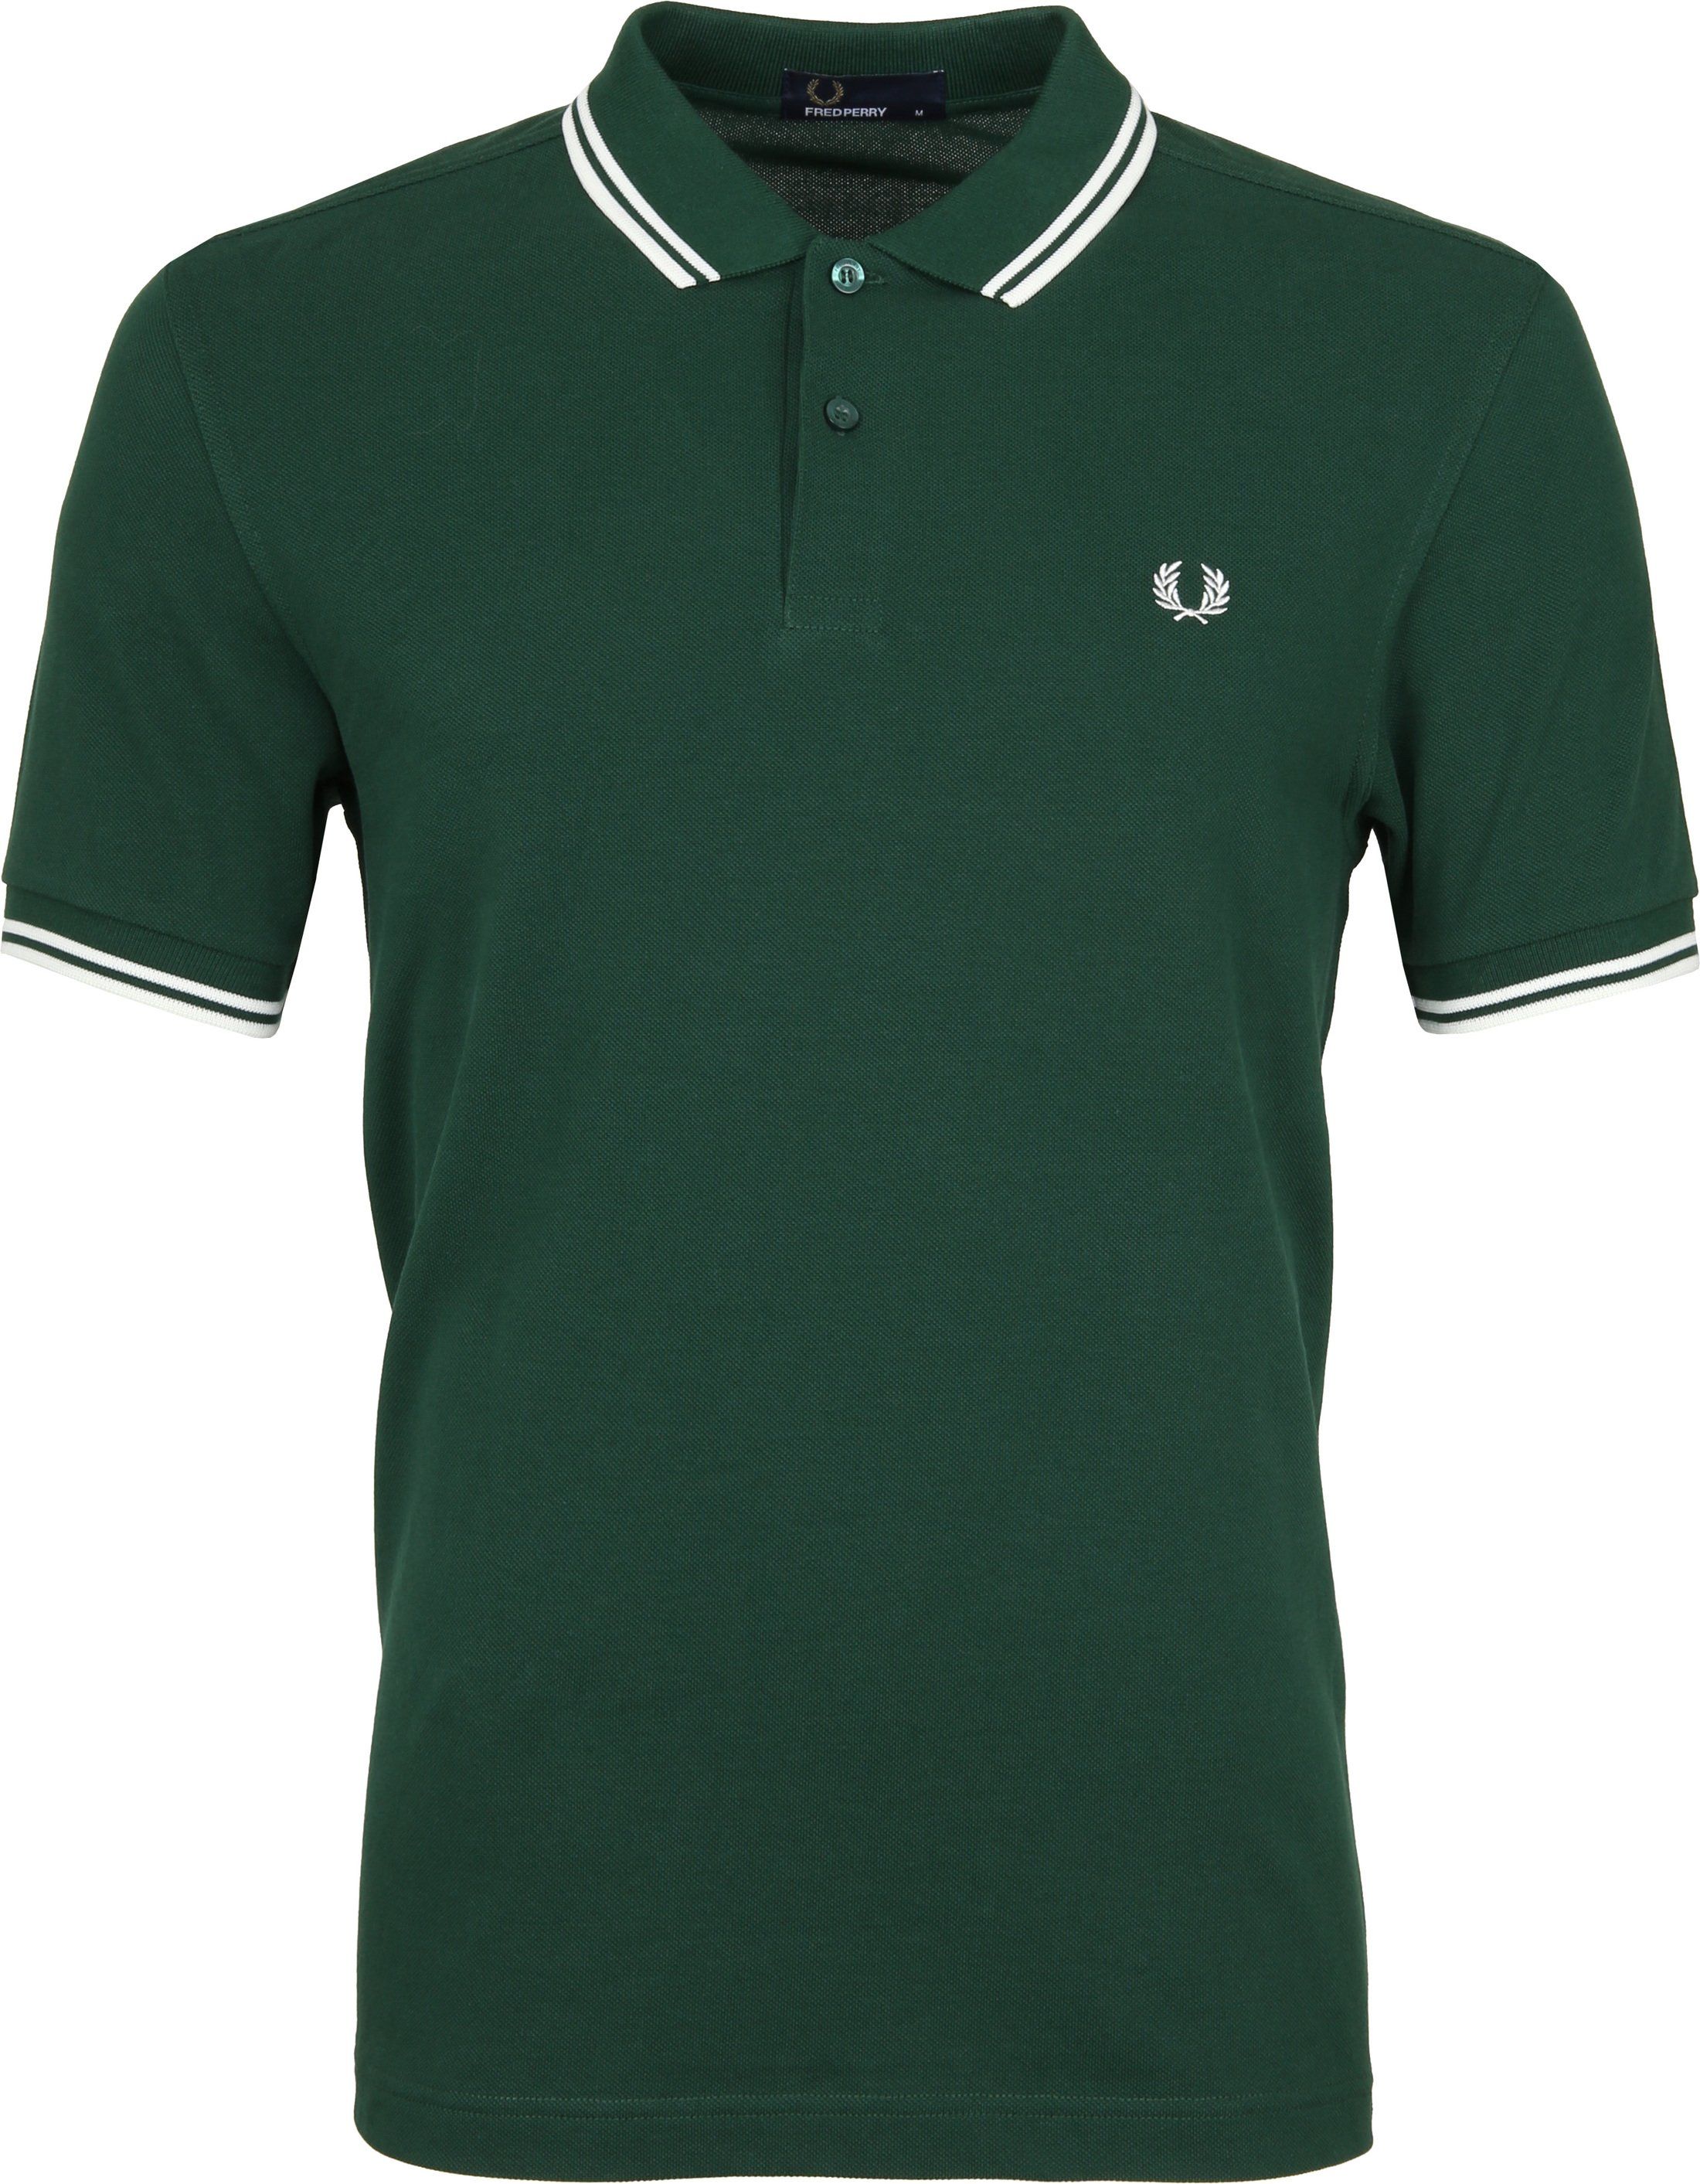 Fred Perry Polo Shirt 406 Dark Green Green size S